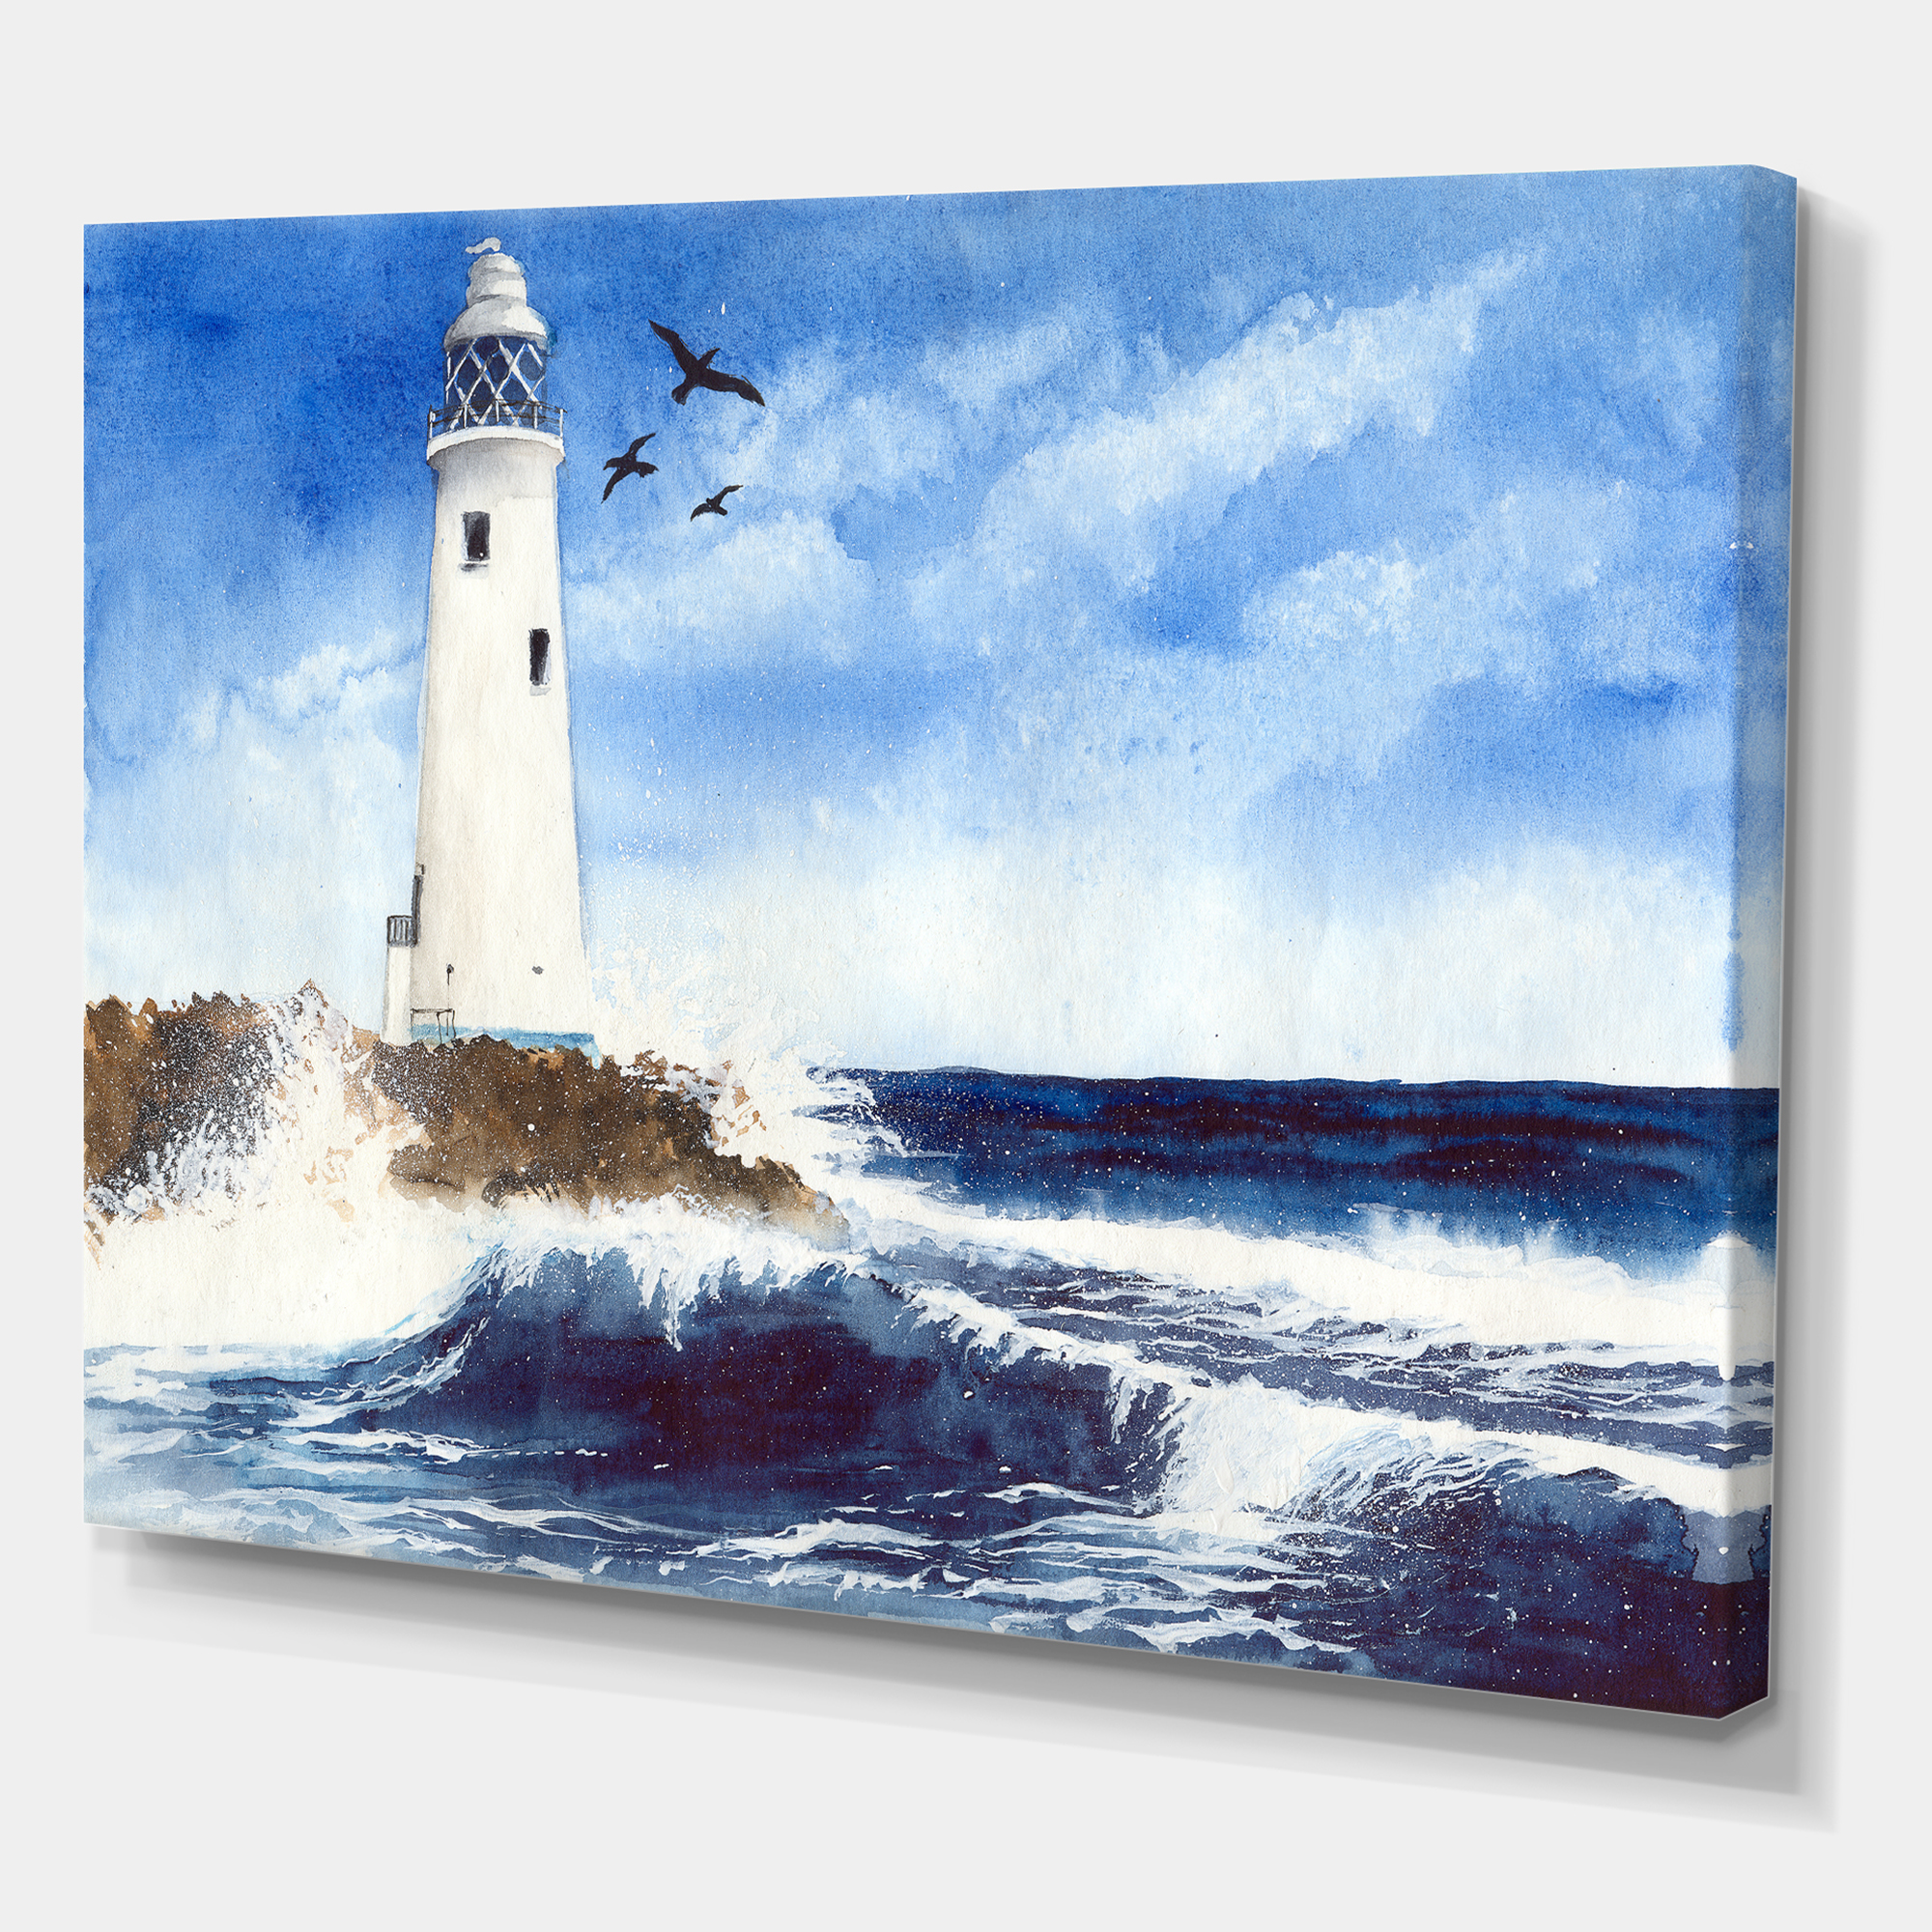 Seagulls With Lighthouse On The Rocky Island 40 in x 30 in Painting Canvas Art Print, by Designart - image 3 of 4